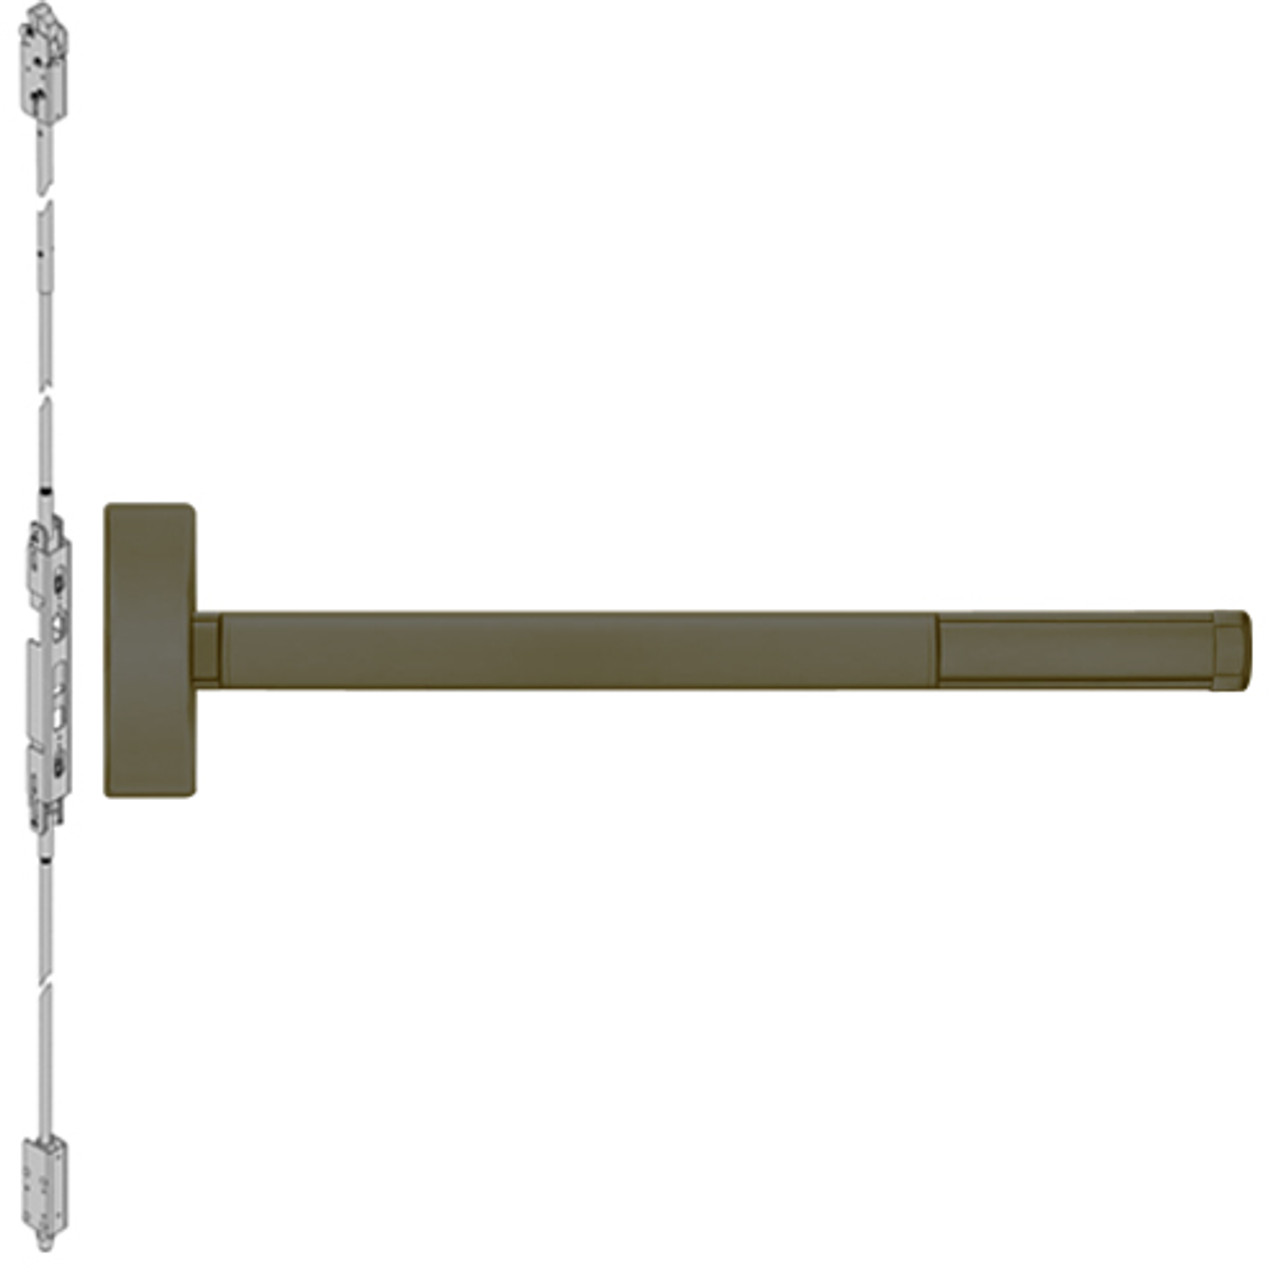 TSFL2805-613-48 PHI 2800 Series Fire Rated Concealed Vertical Rod Exit Device with Touchbar Monitoring Switch Prepped for Key Controls Thumb Piece in Oil Rubbed Bronze Finish